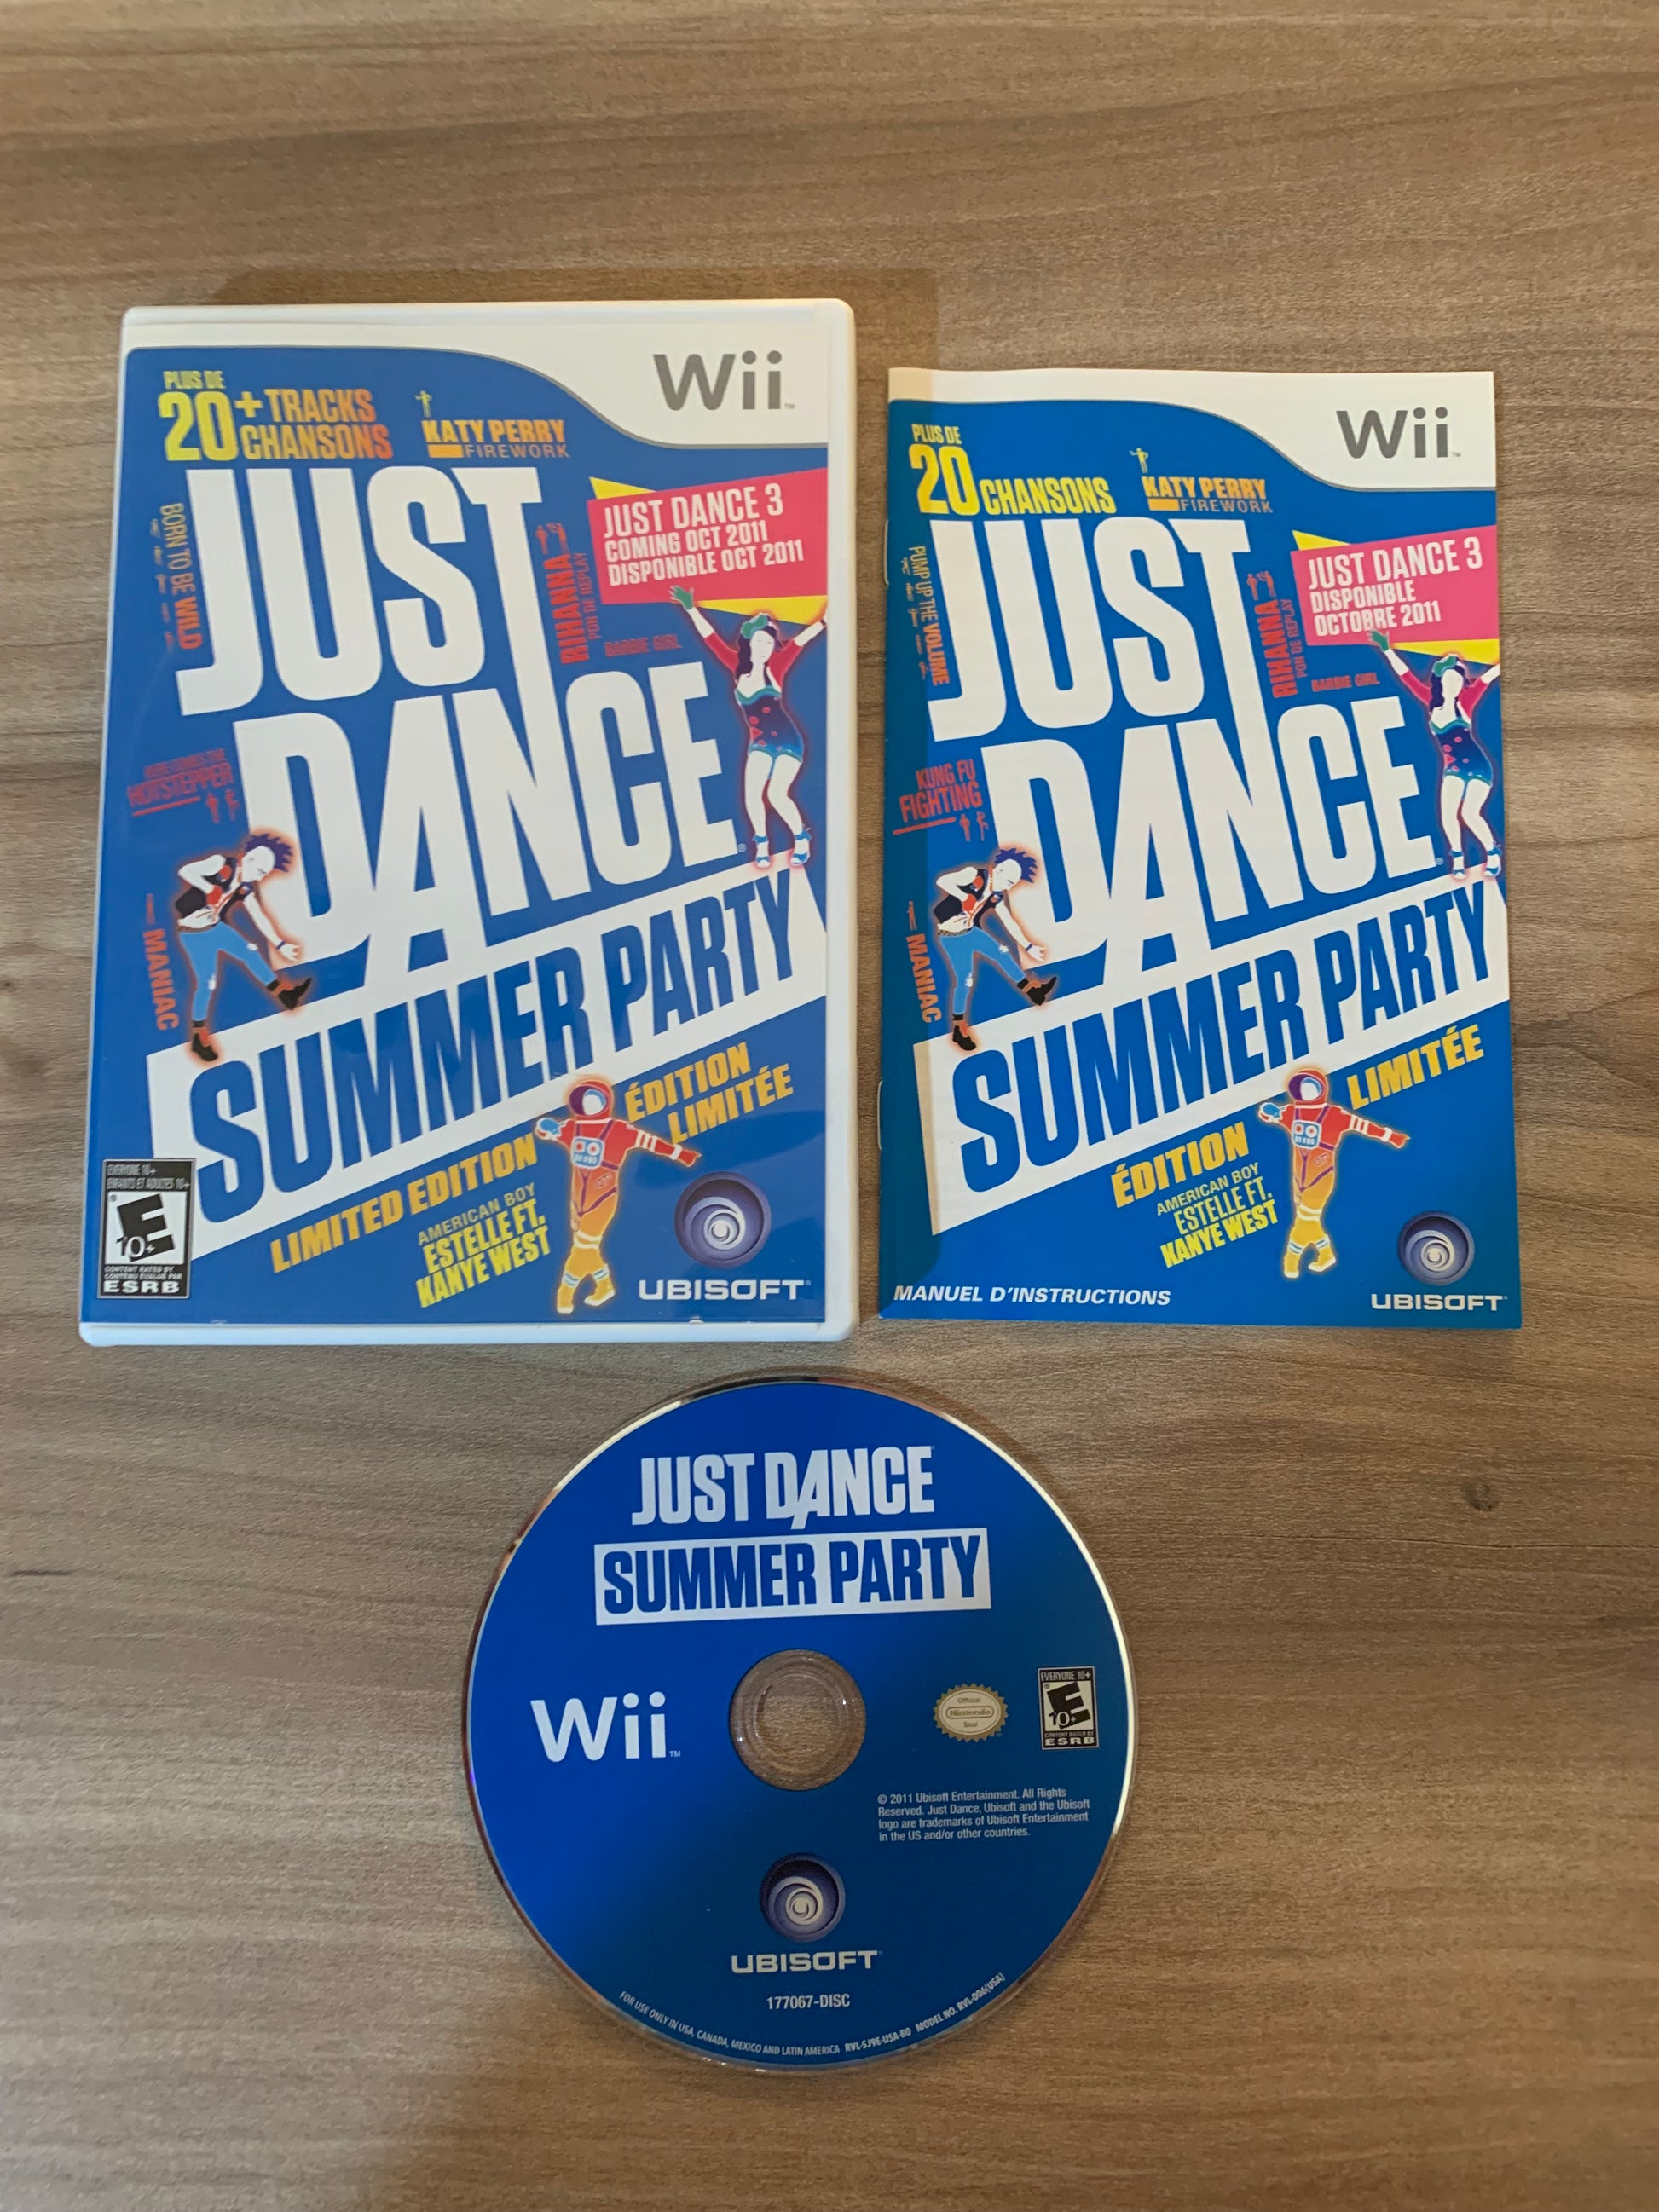 PiXEL-RETRO.COM : NINTENDO WII COMPLET CIB BOX MANUAL GAME NTSC JUST DANCE SUMMER PARTY LiMiTED EDiTiON